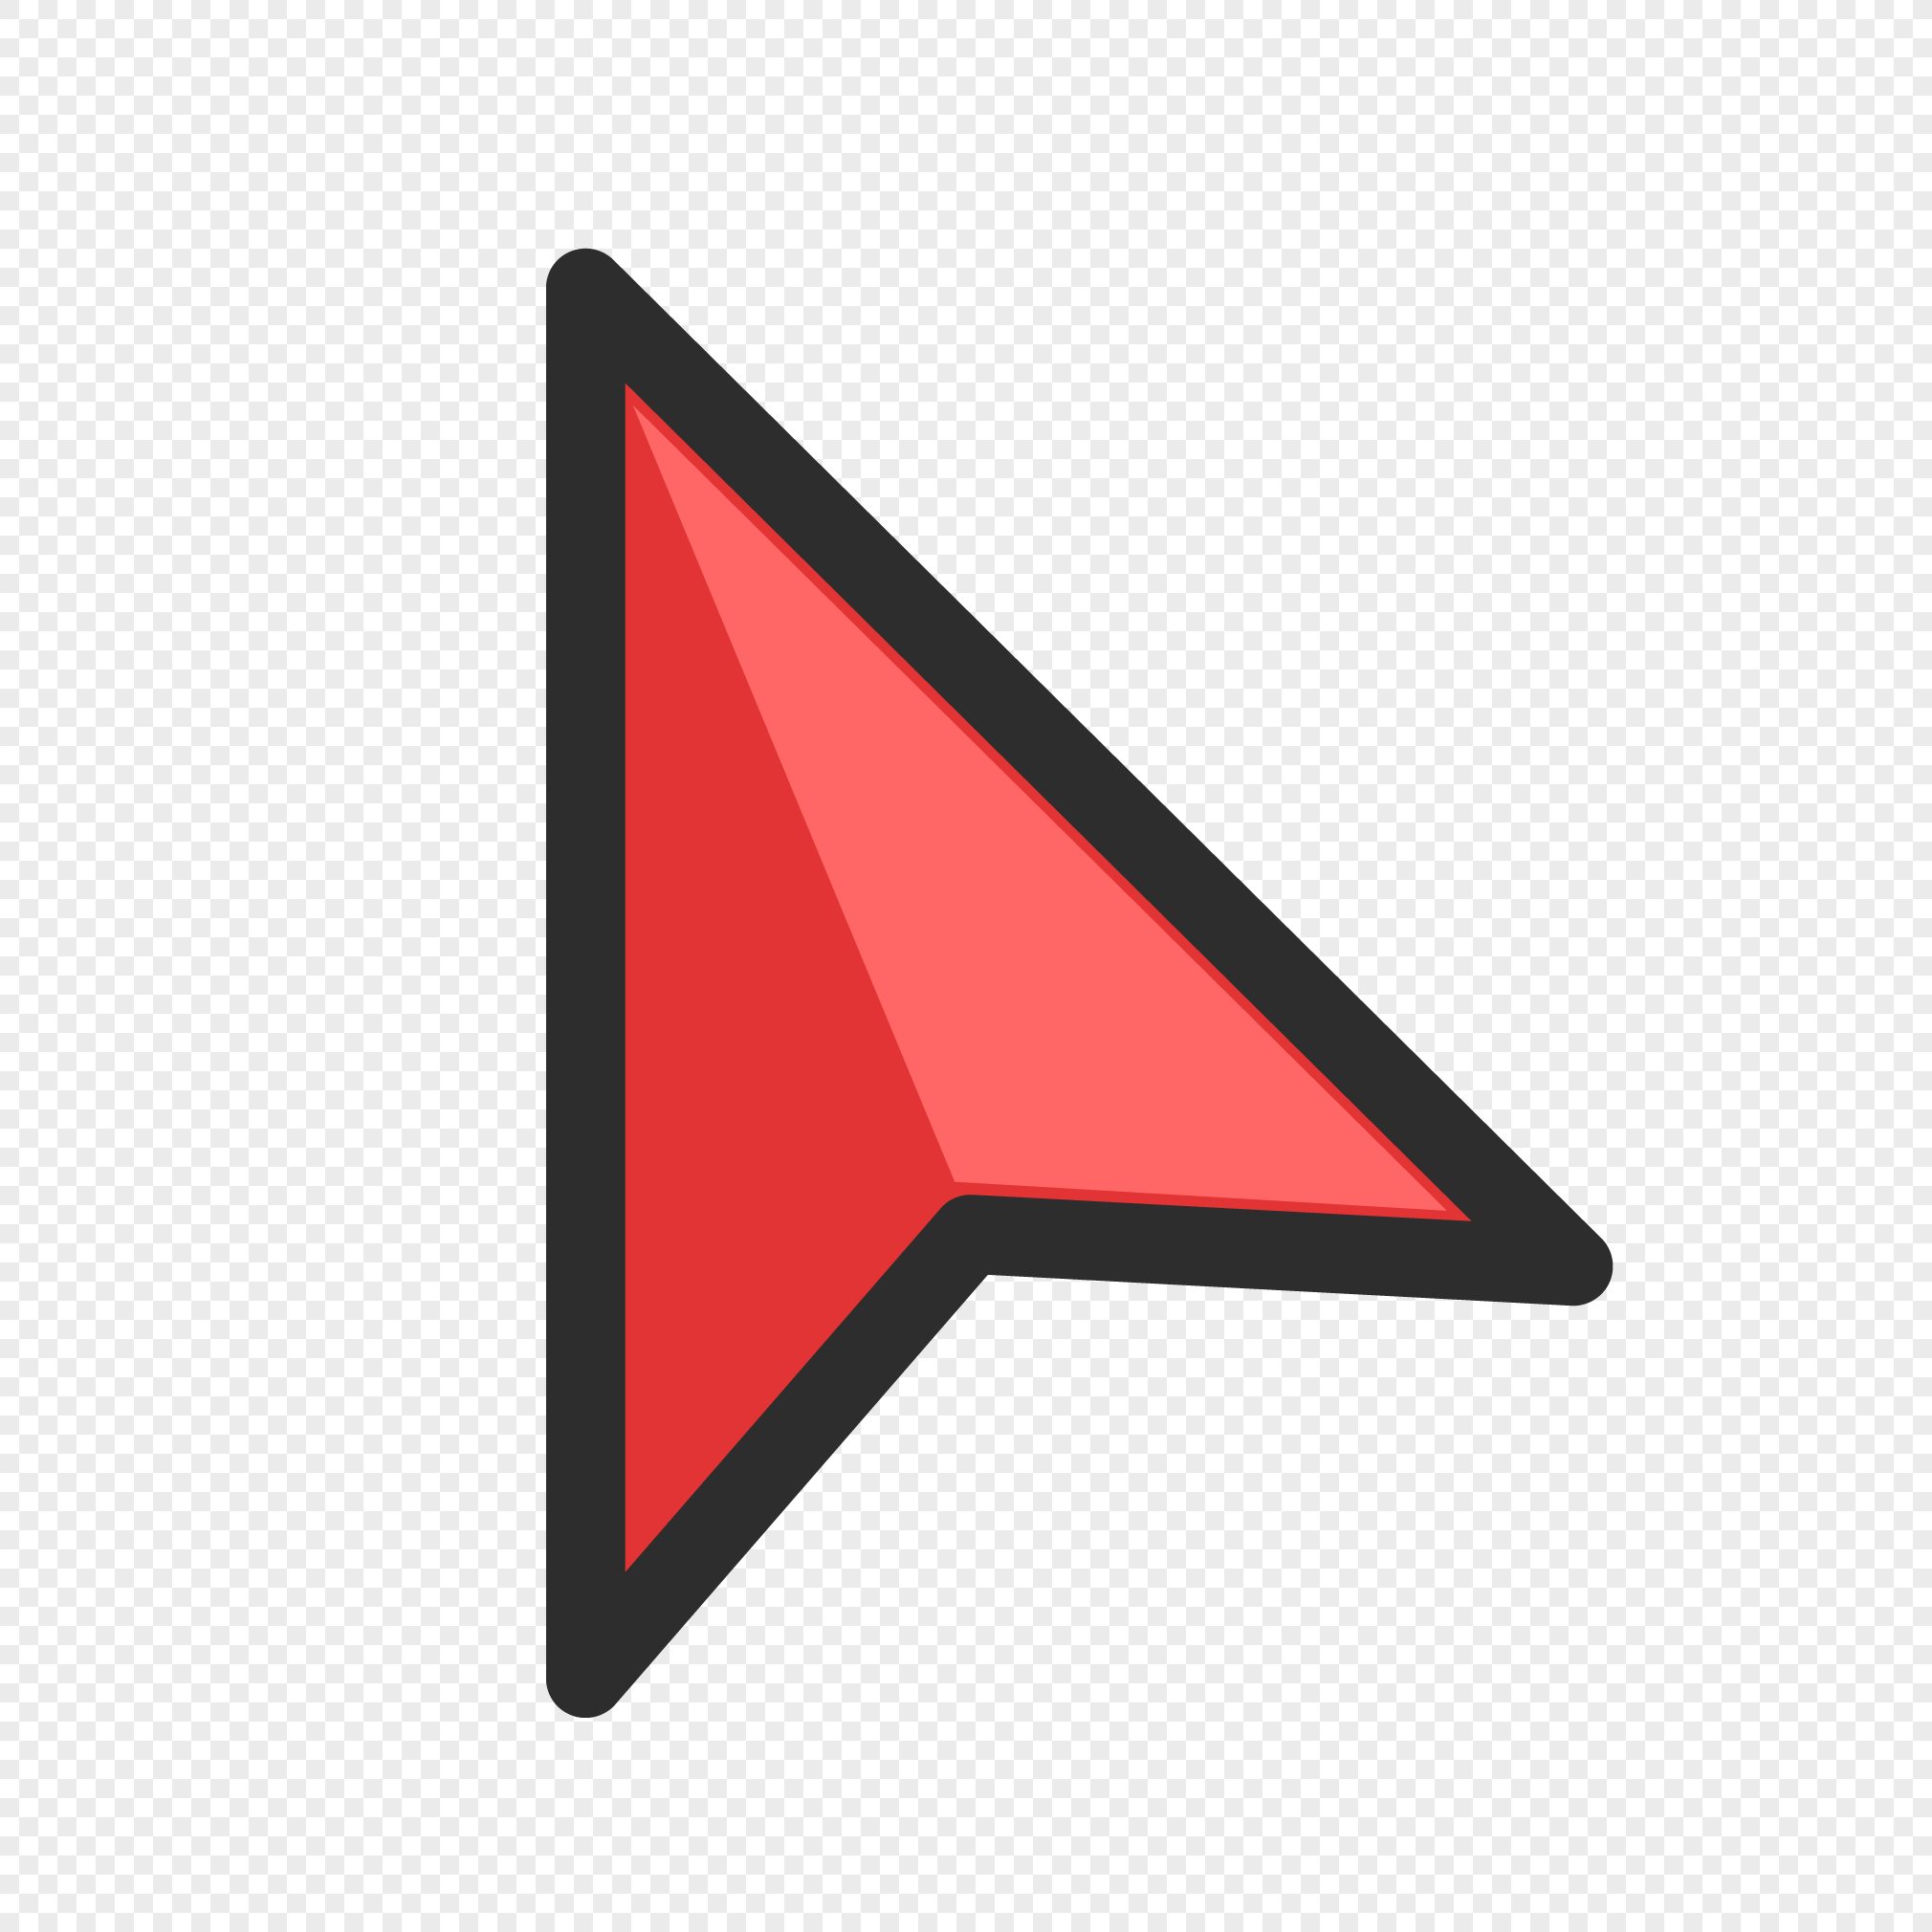 Red Mouse Logo - Cartoon red mouse cursor design small icon png image_picture free